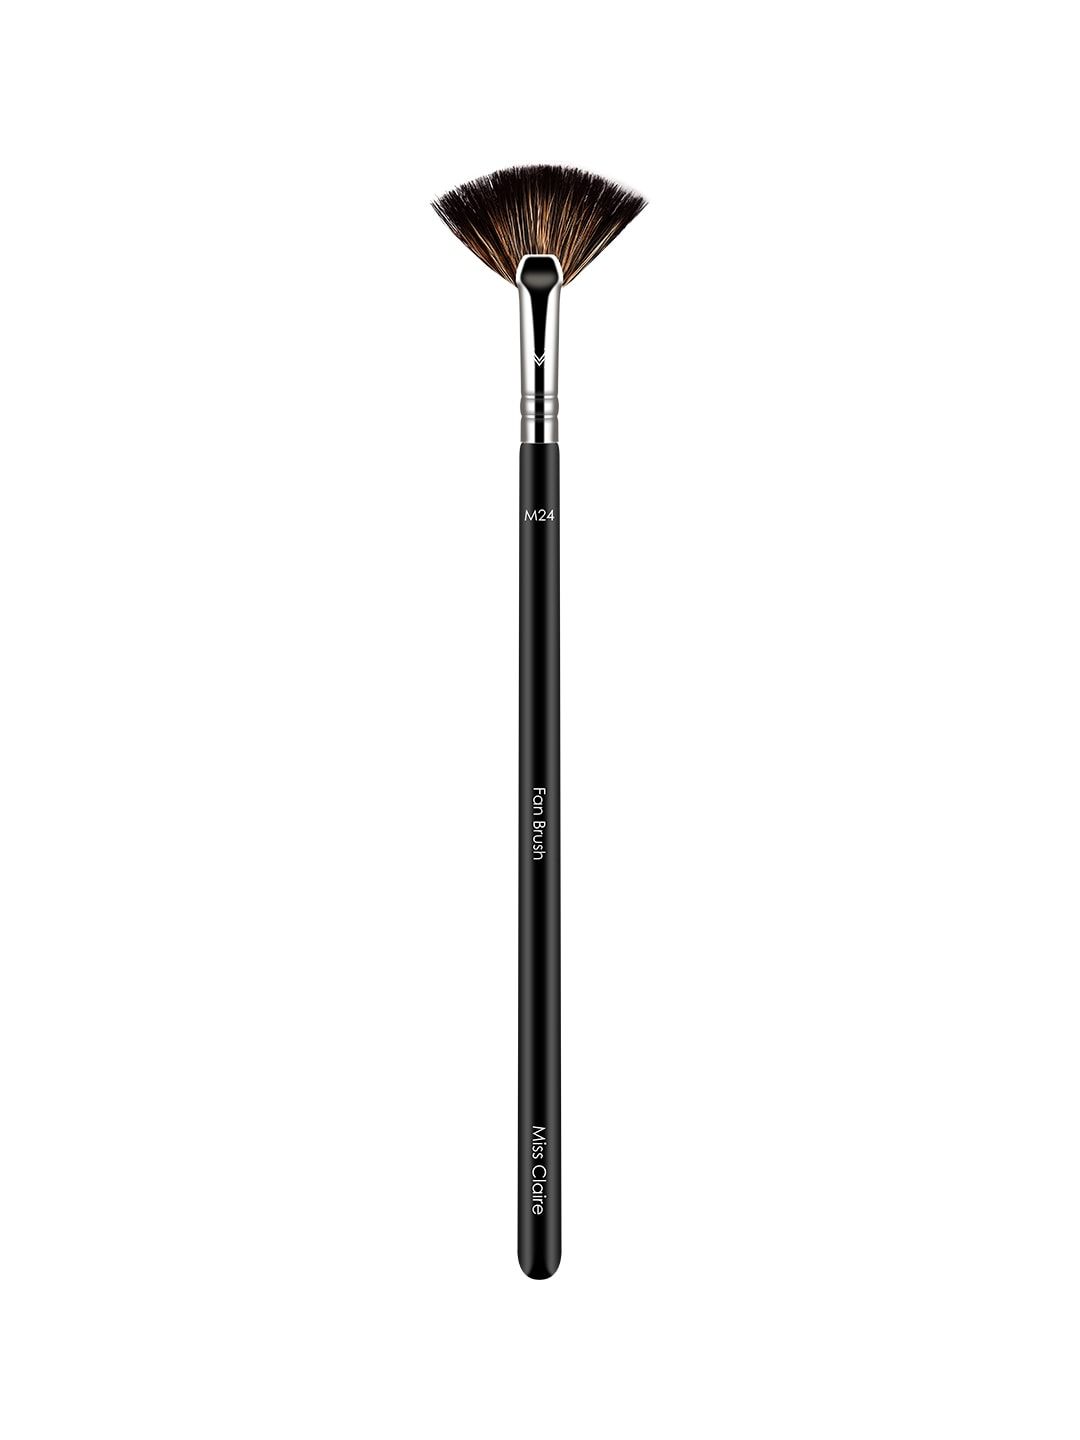 Miss Claire M24 - Fan Brush - Silver-Toned & Black Price in India